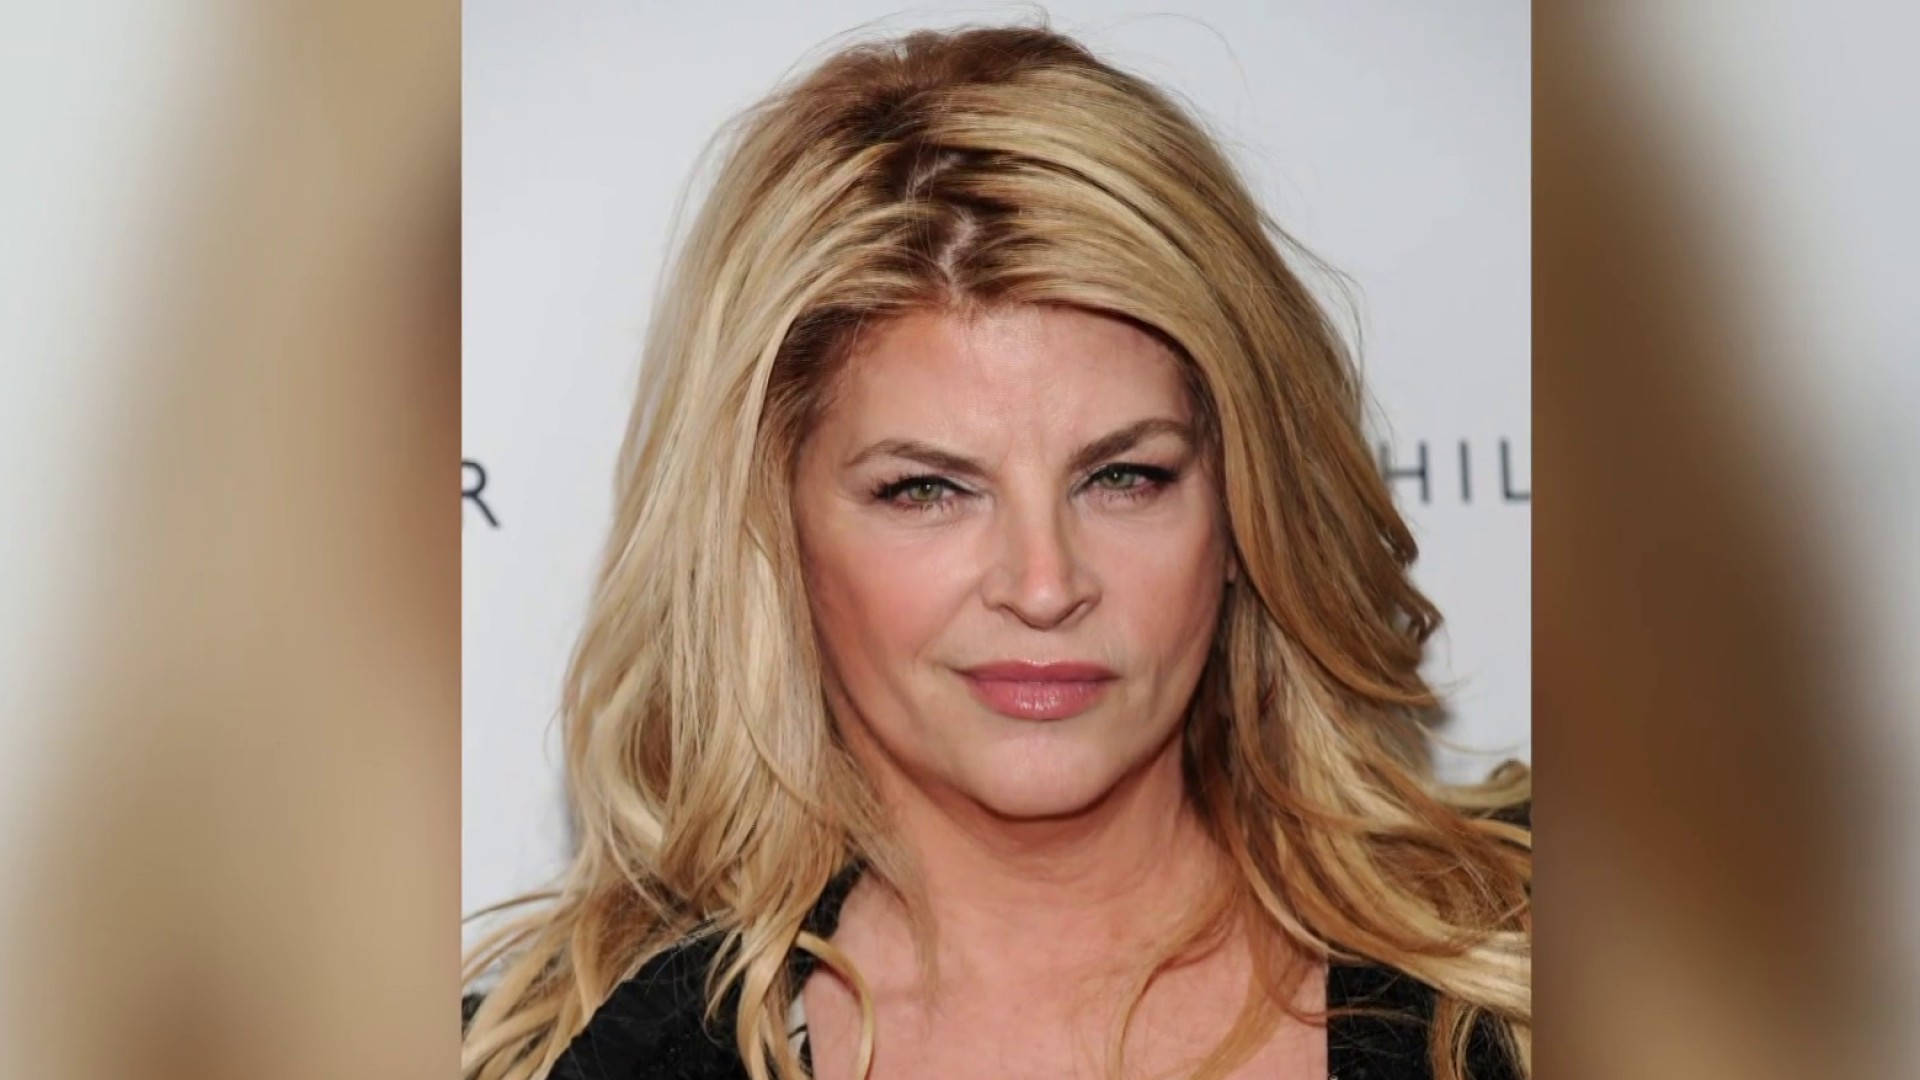 American Actress Kirstie Alley On Red Carpet Shot Background